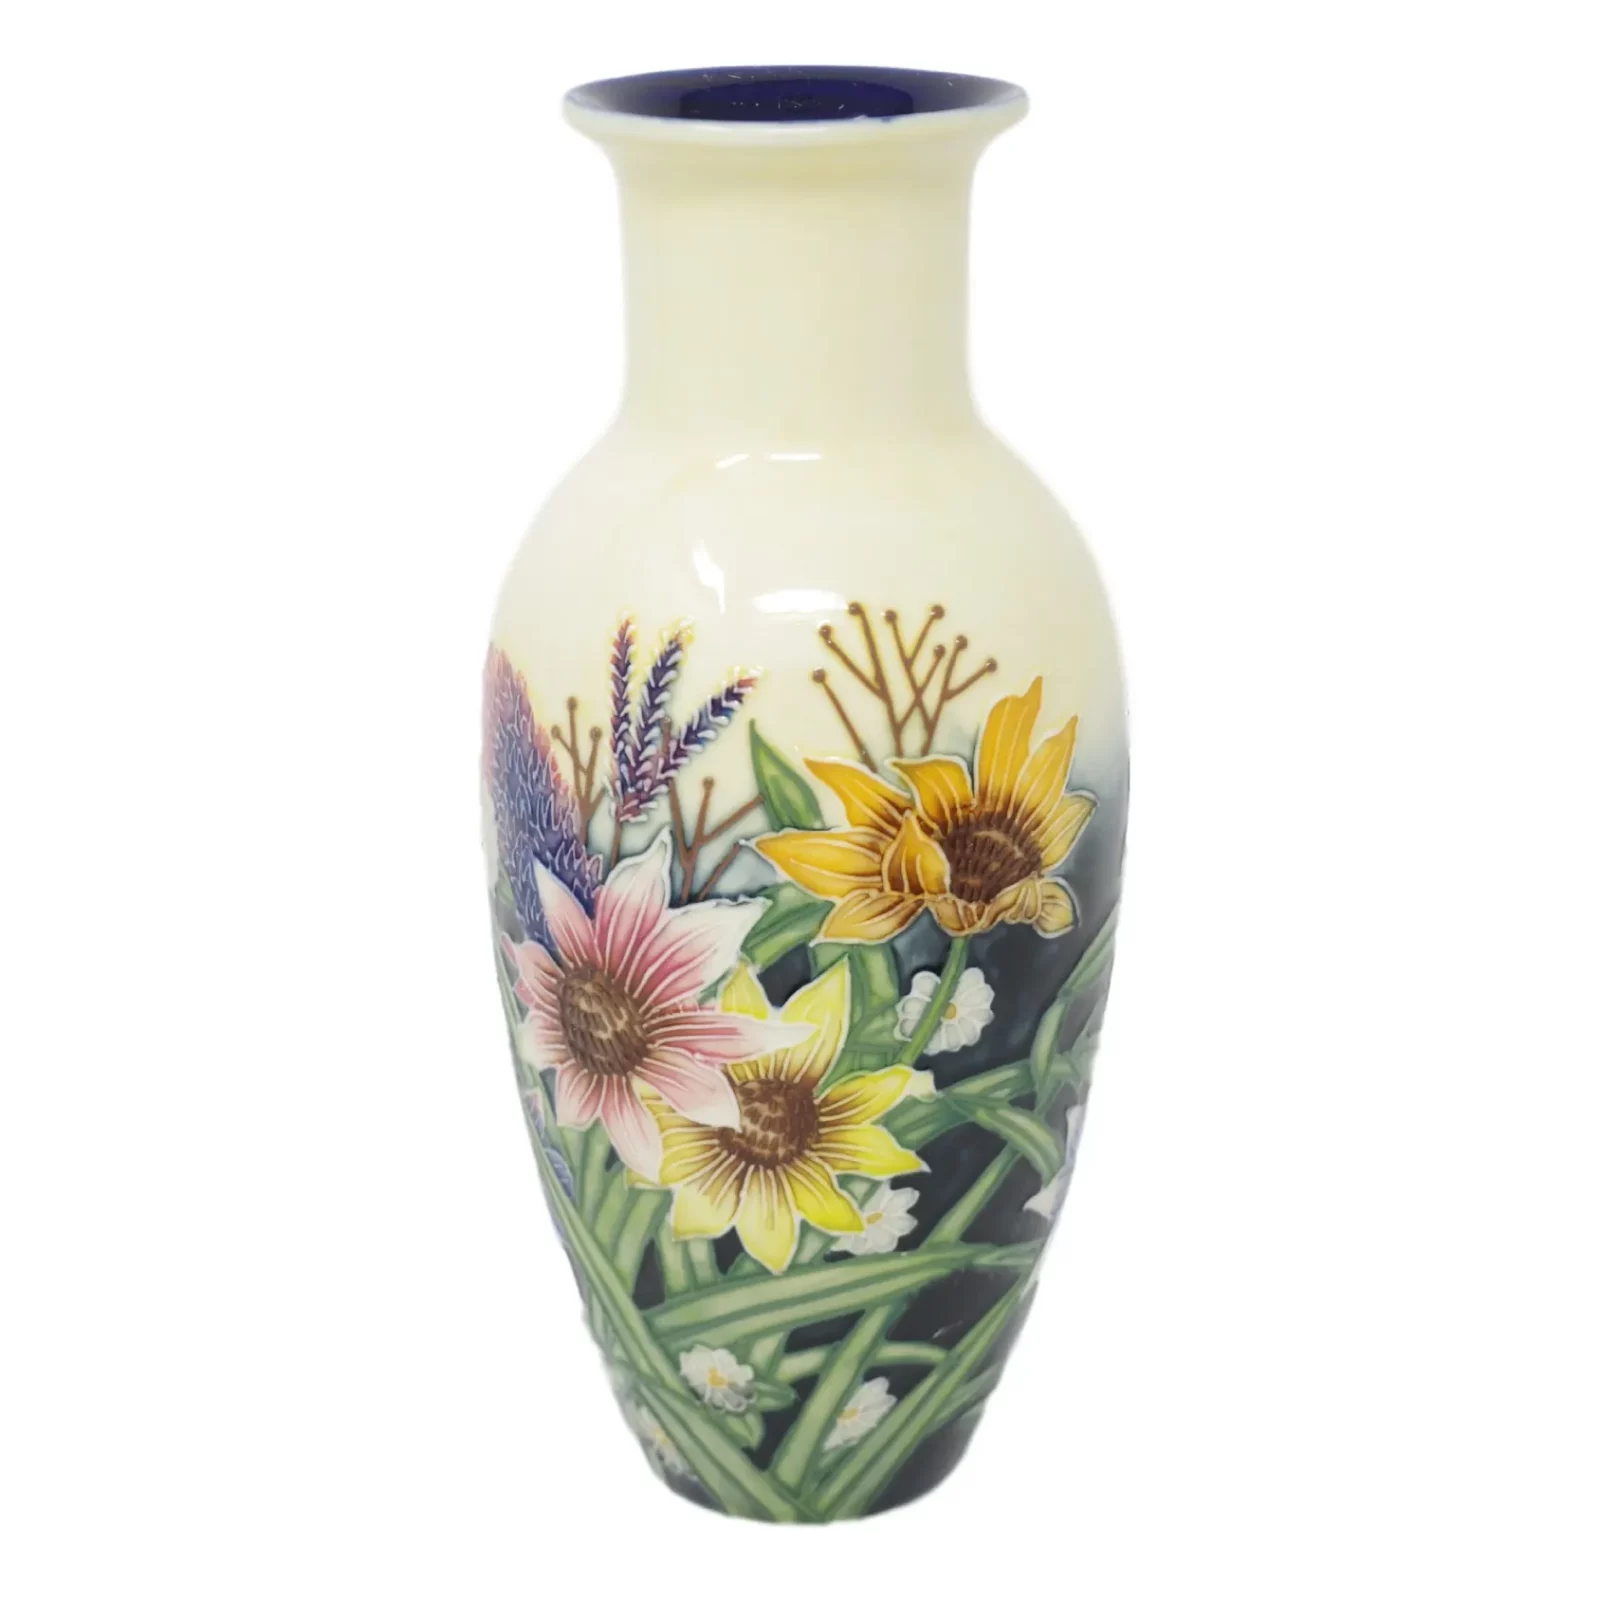 Old Tupton Ware Vase with sunflowers decoration and 8 inches tall